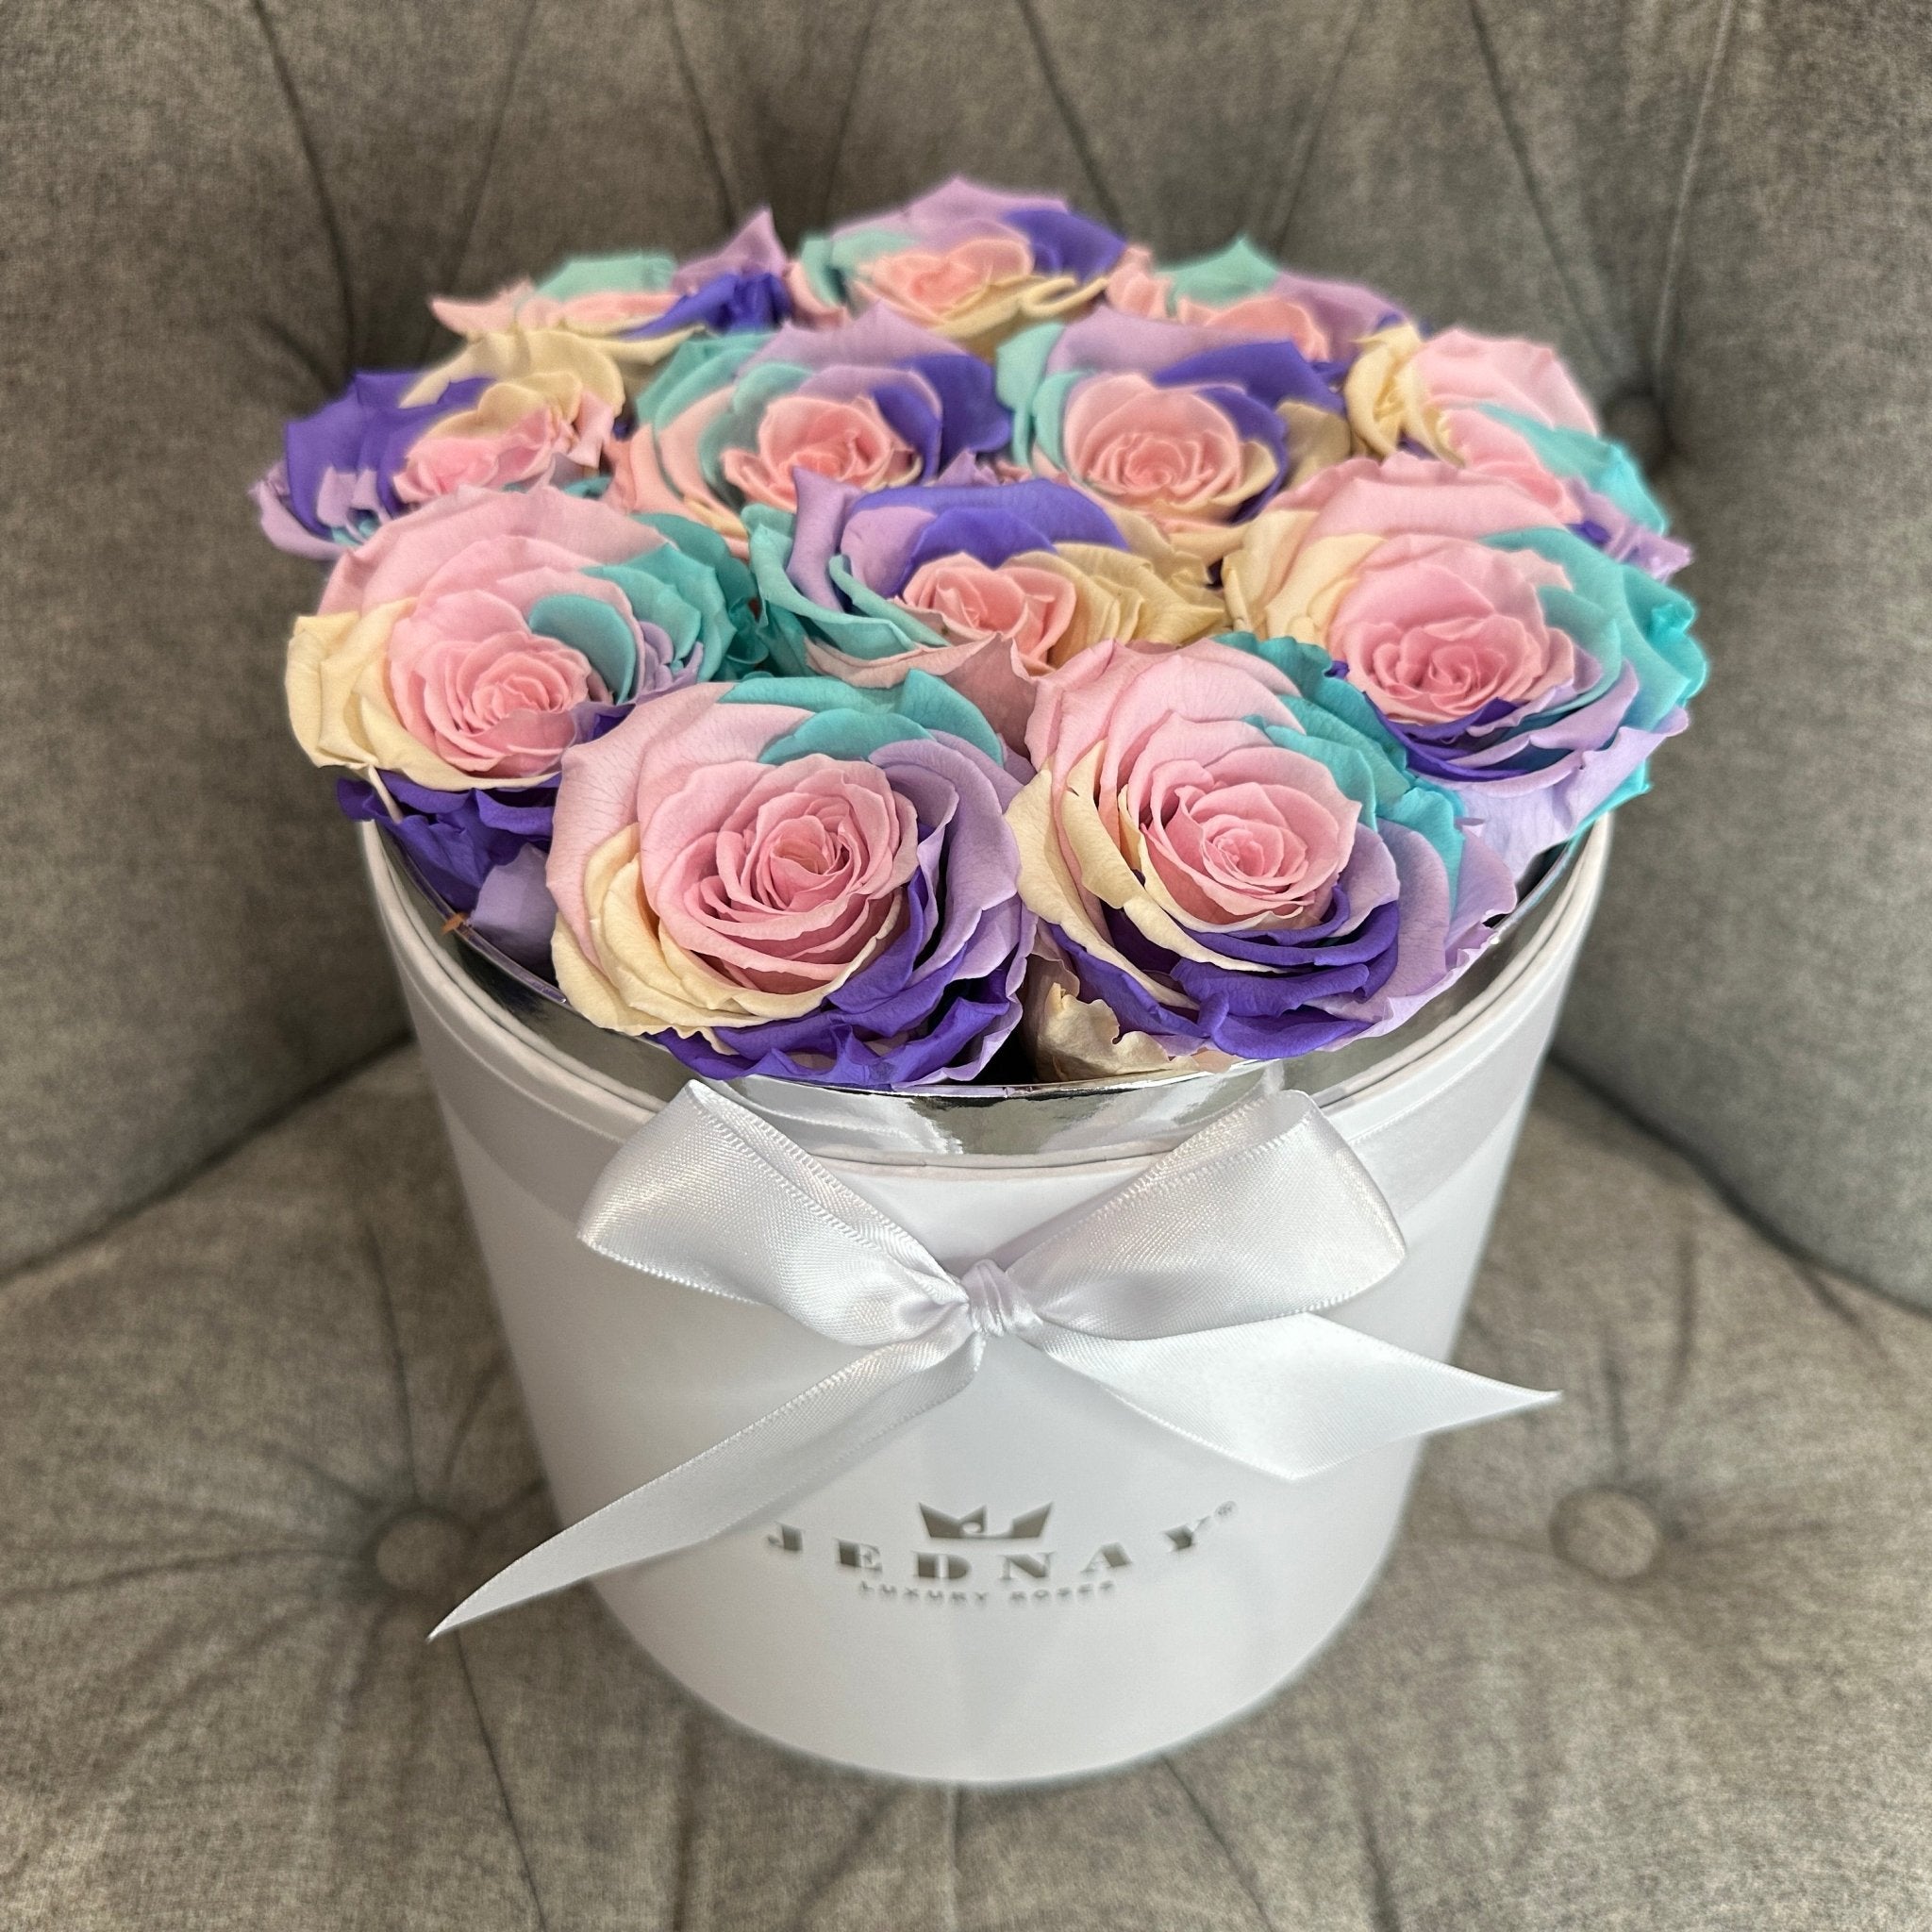 Large Classic White Forever Rose Box - Over The Rainbow Eternal Roses - Jednay Roses